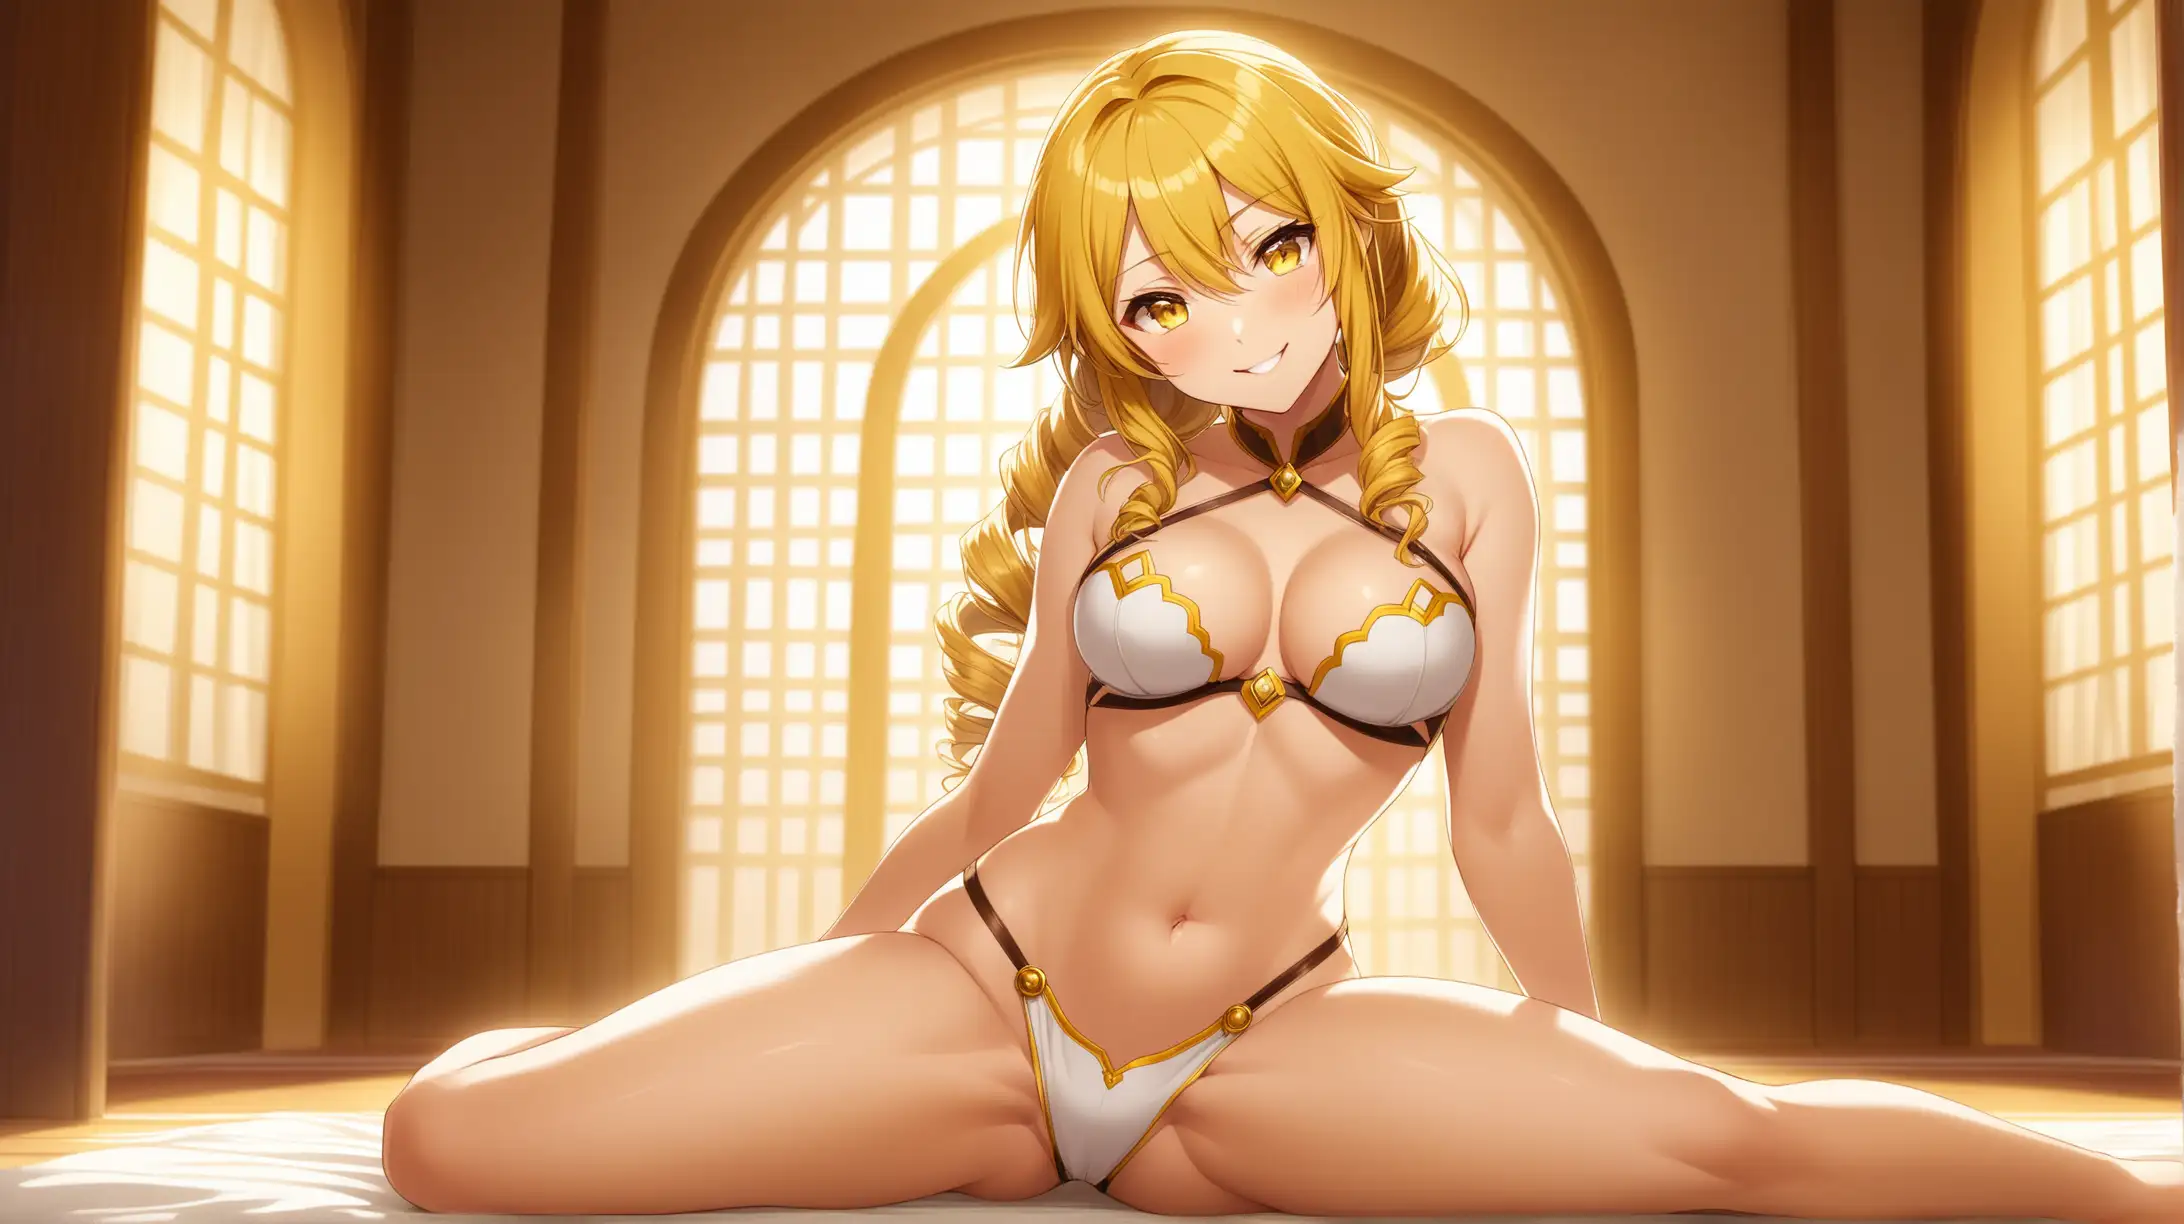 Blonde Anime Character Mami Tomoe in Seductive Pose with Revealing Outfit